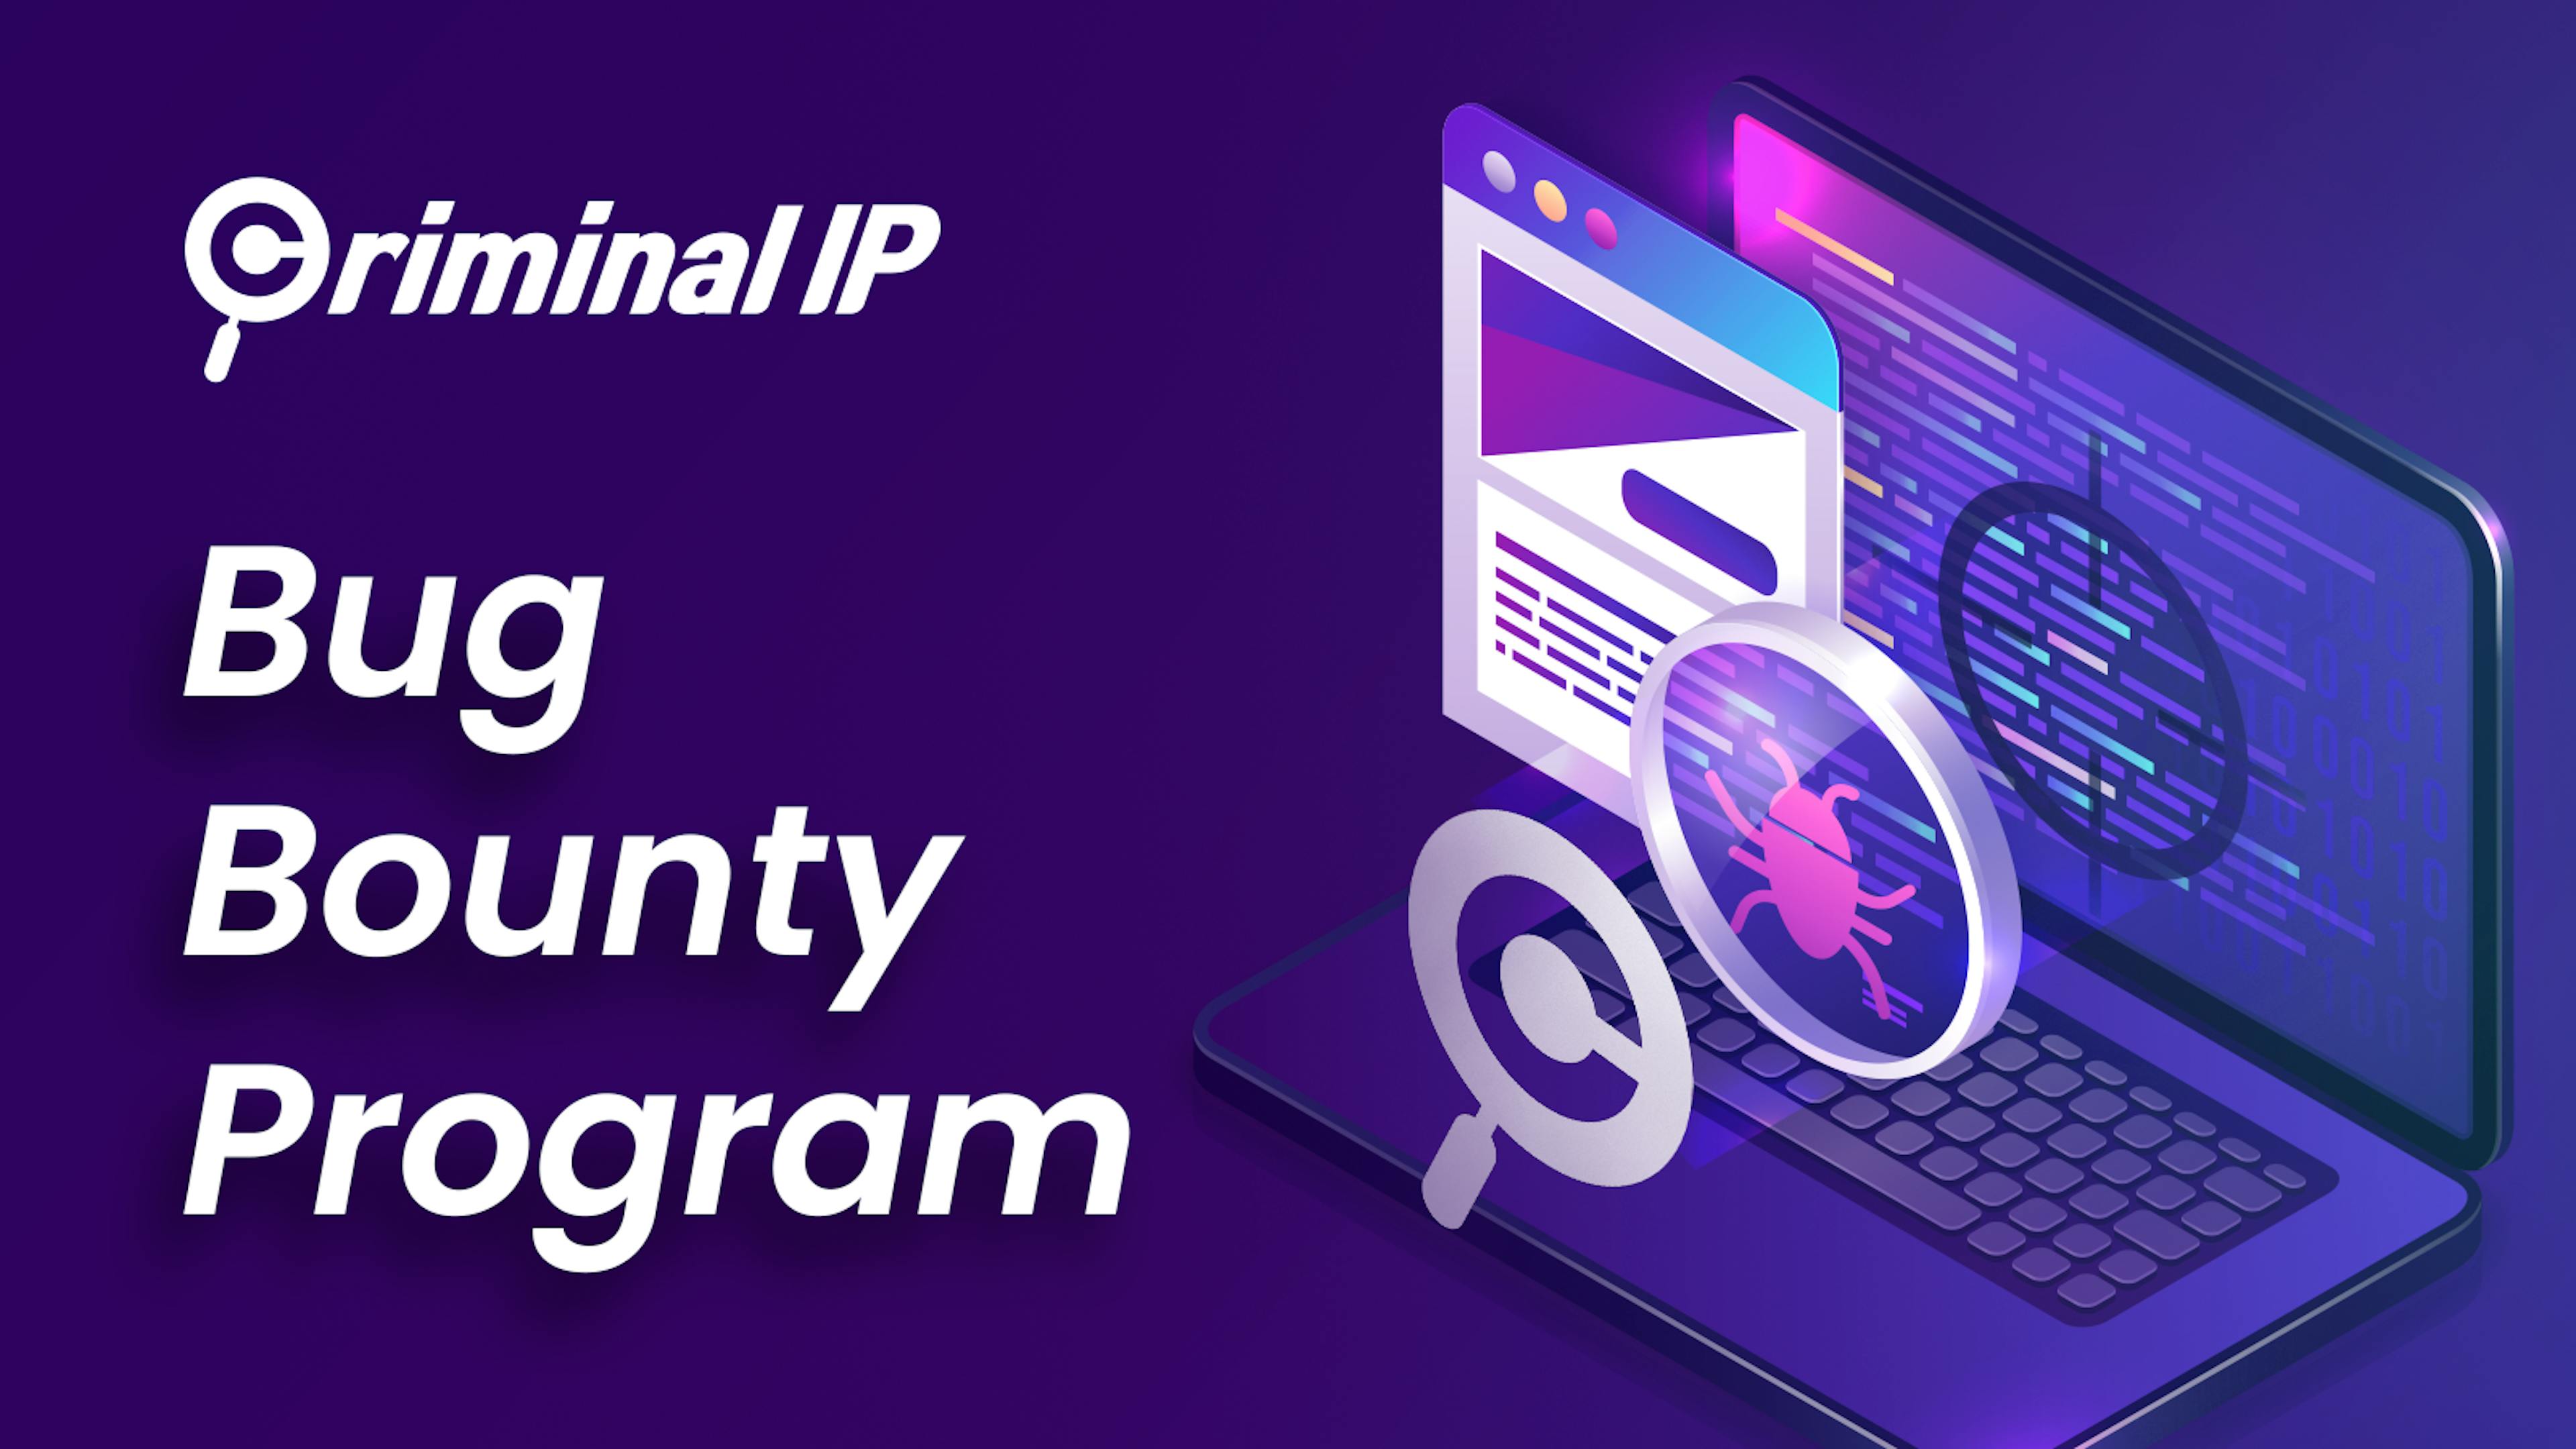 Criminal IP has recently announced the introduction of a bug bounty program